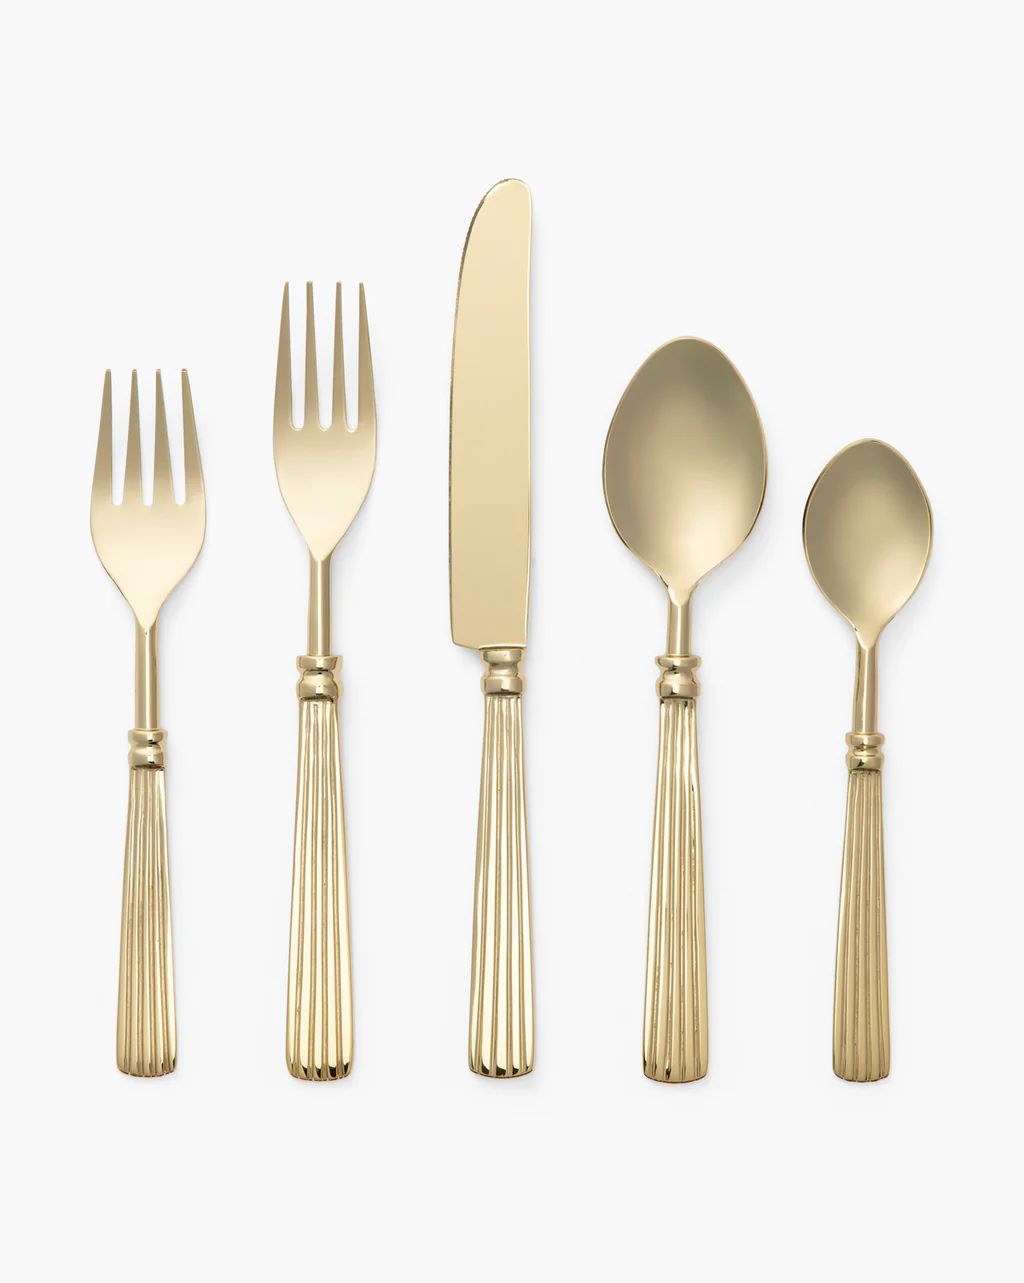 McNully Polished Brass Flatware (Set of 5) | McGee & Co.